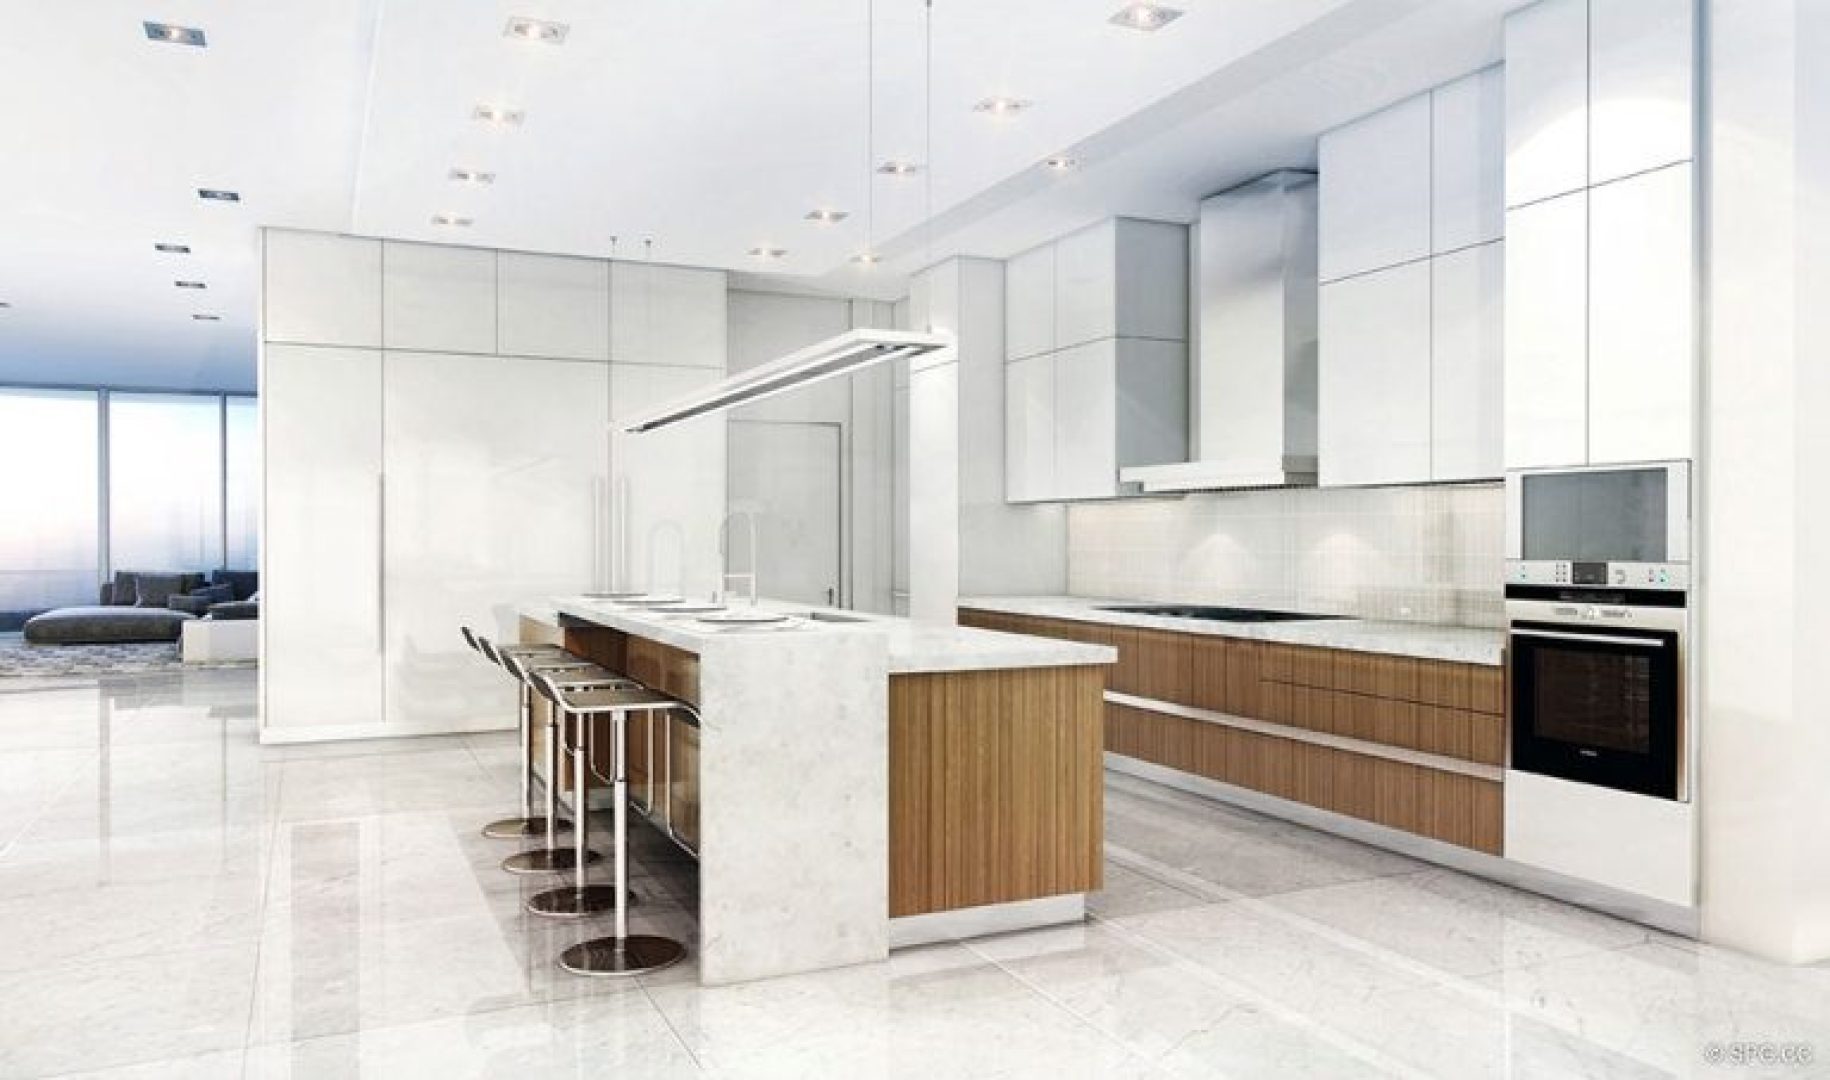 Gourmet Kitchens inside 321 at Water's Edge, Luxury Waterfront Condos in Fort Lauderdale, Florida 33304